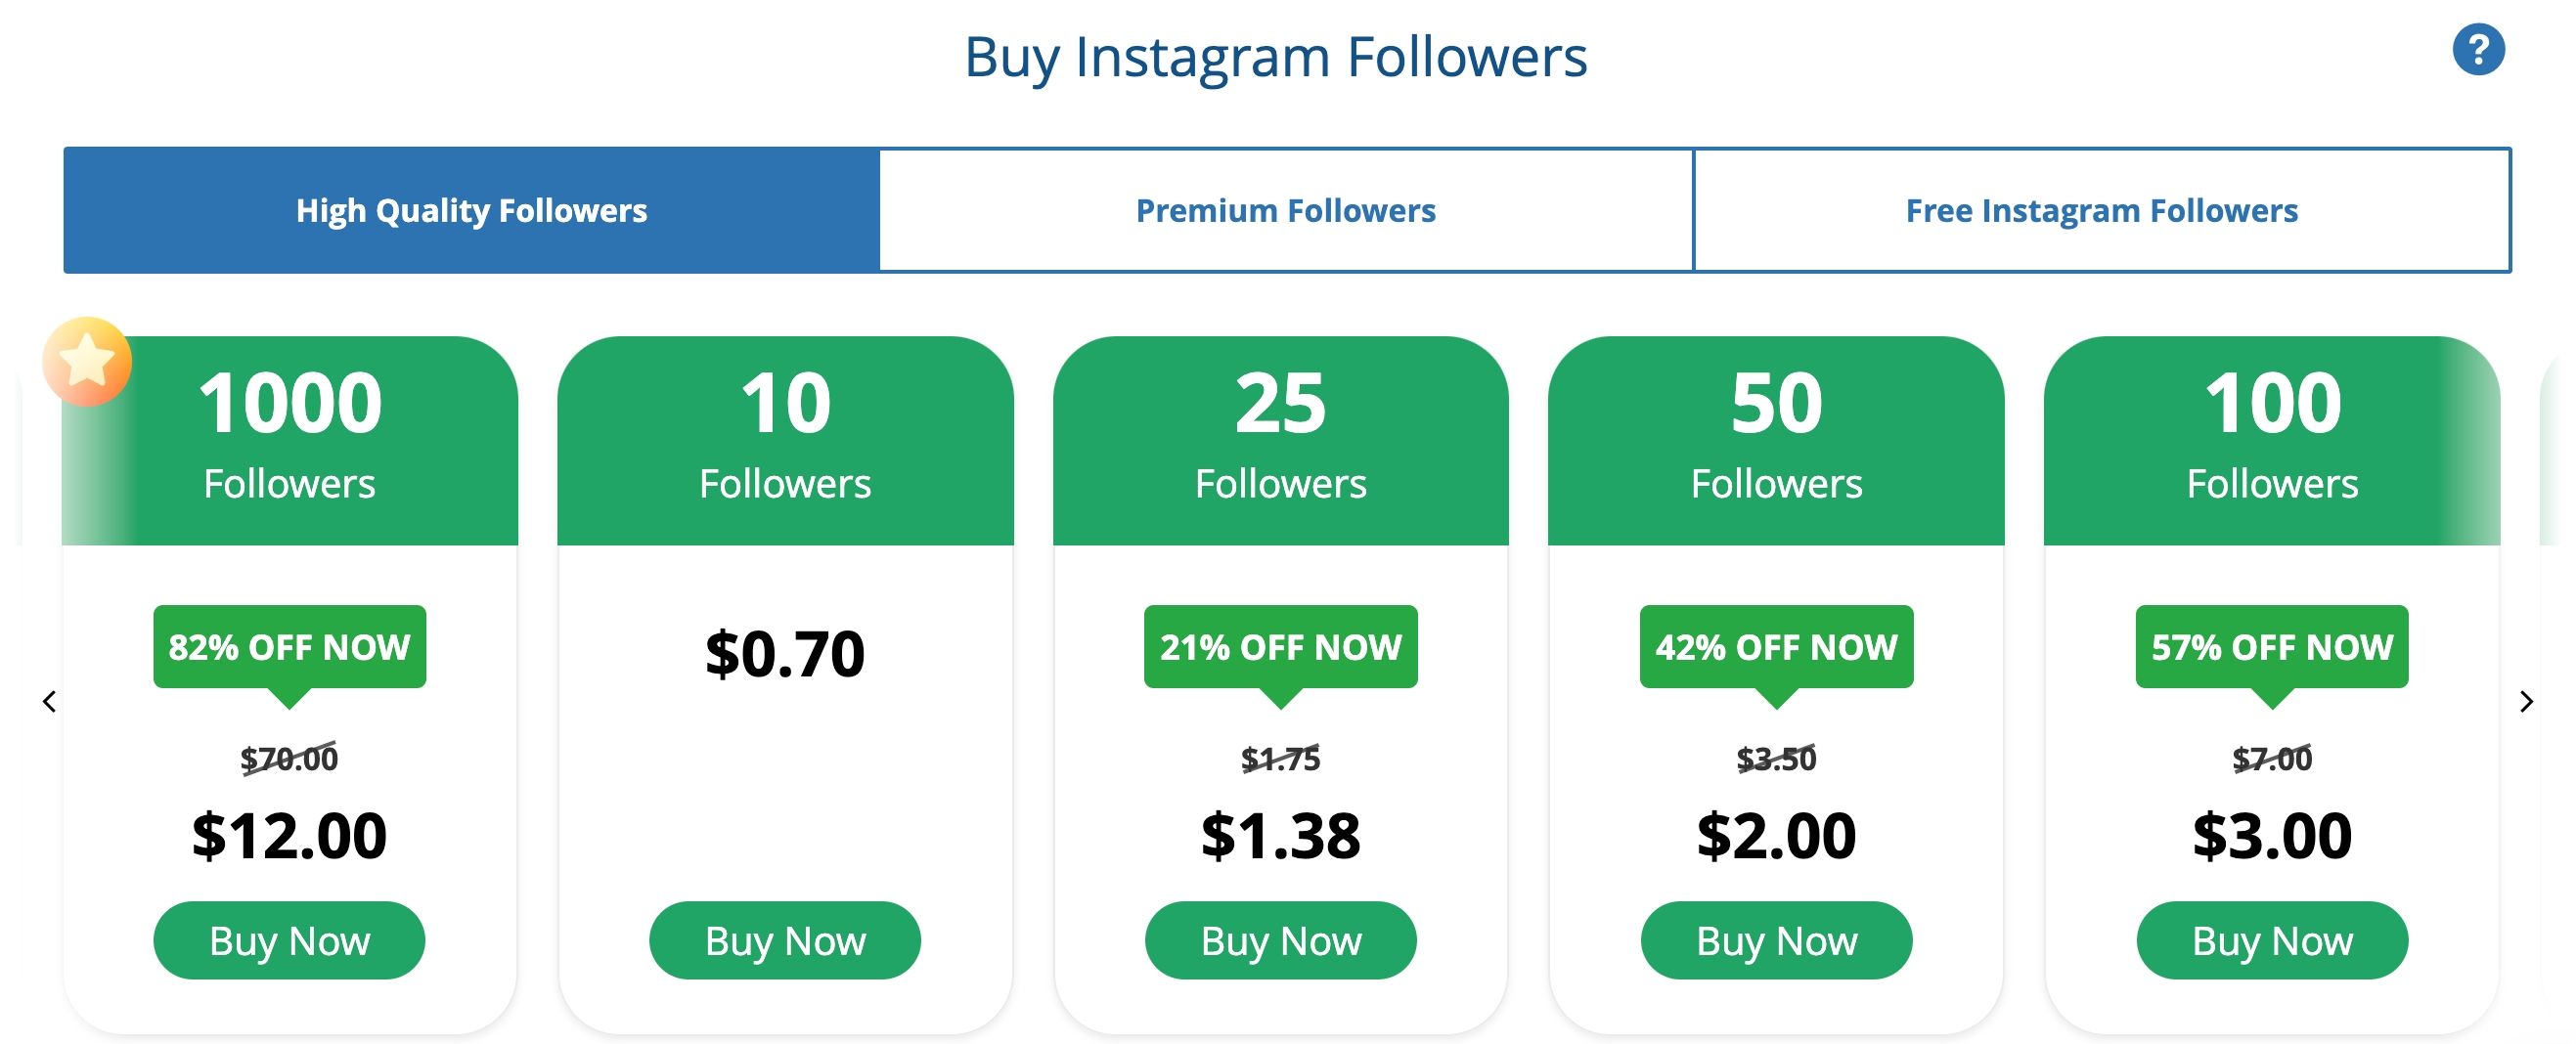 An ad marketing Instagram followers for purchase